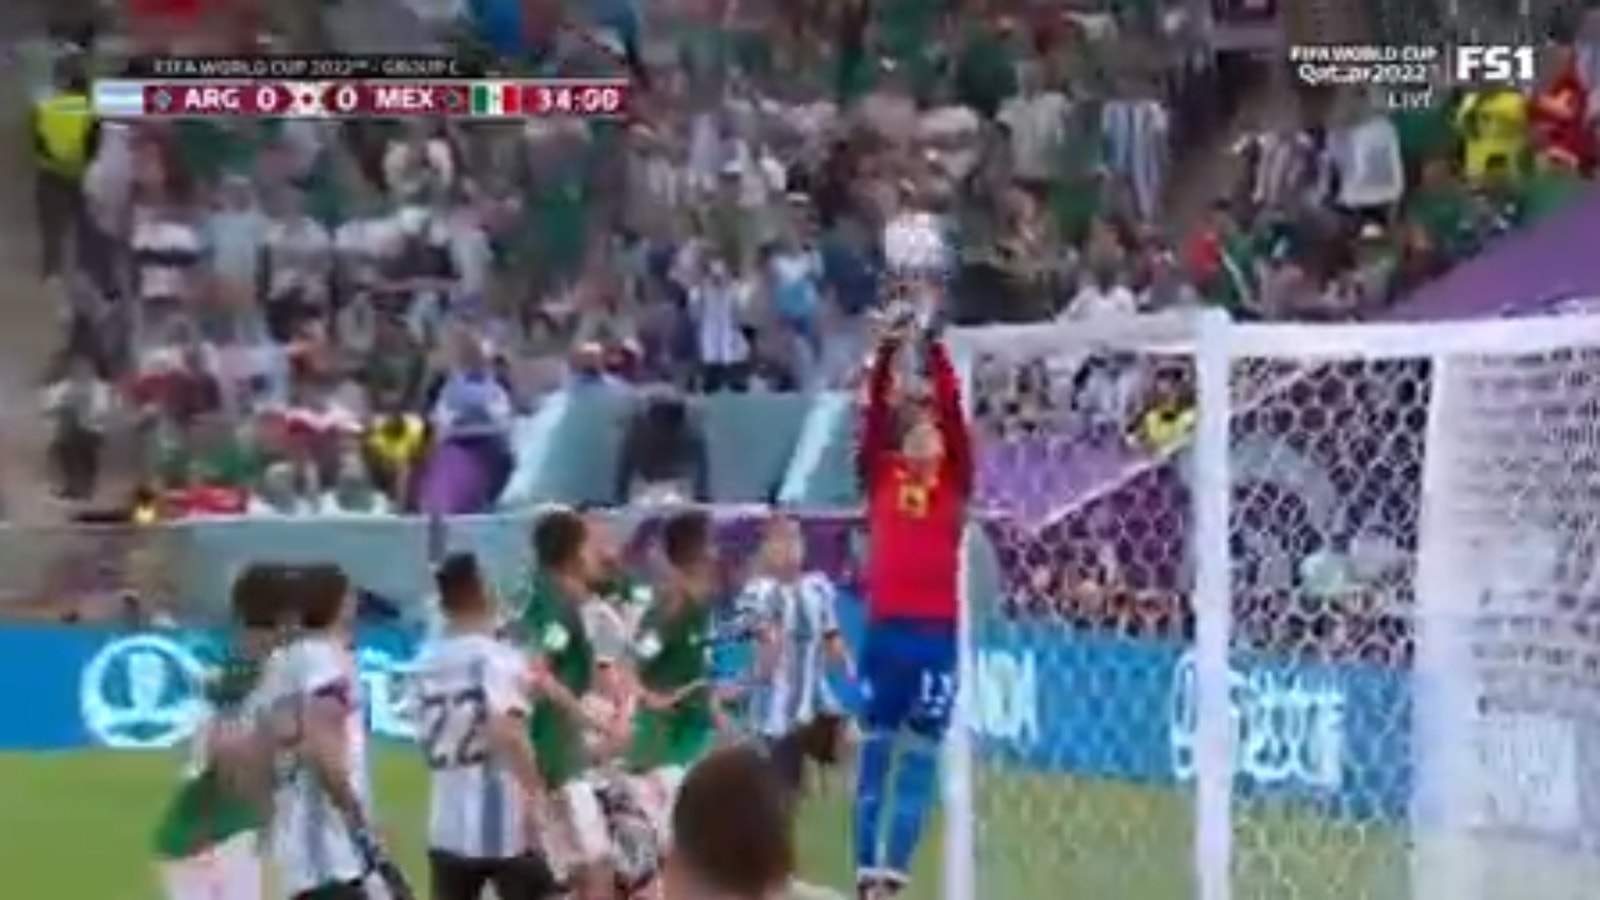 On the verge of the first goal of the match, Argentina's Lionel Messi punched Ochoa.